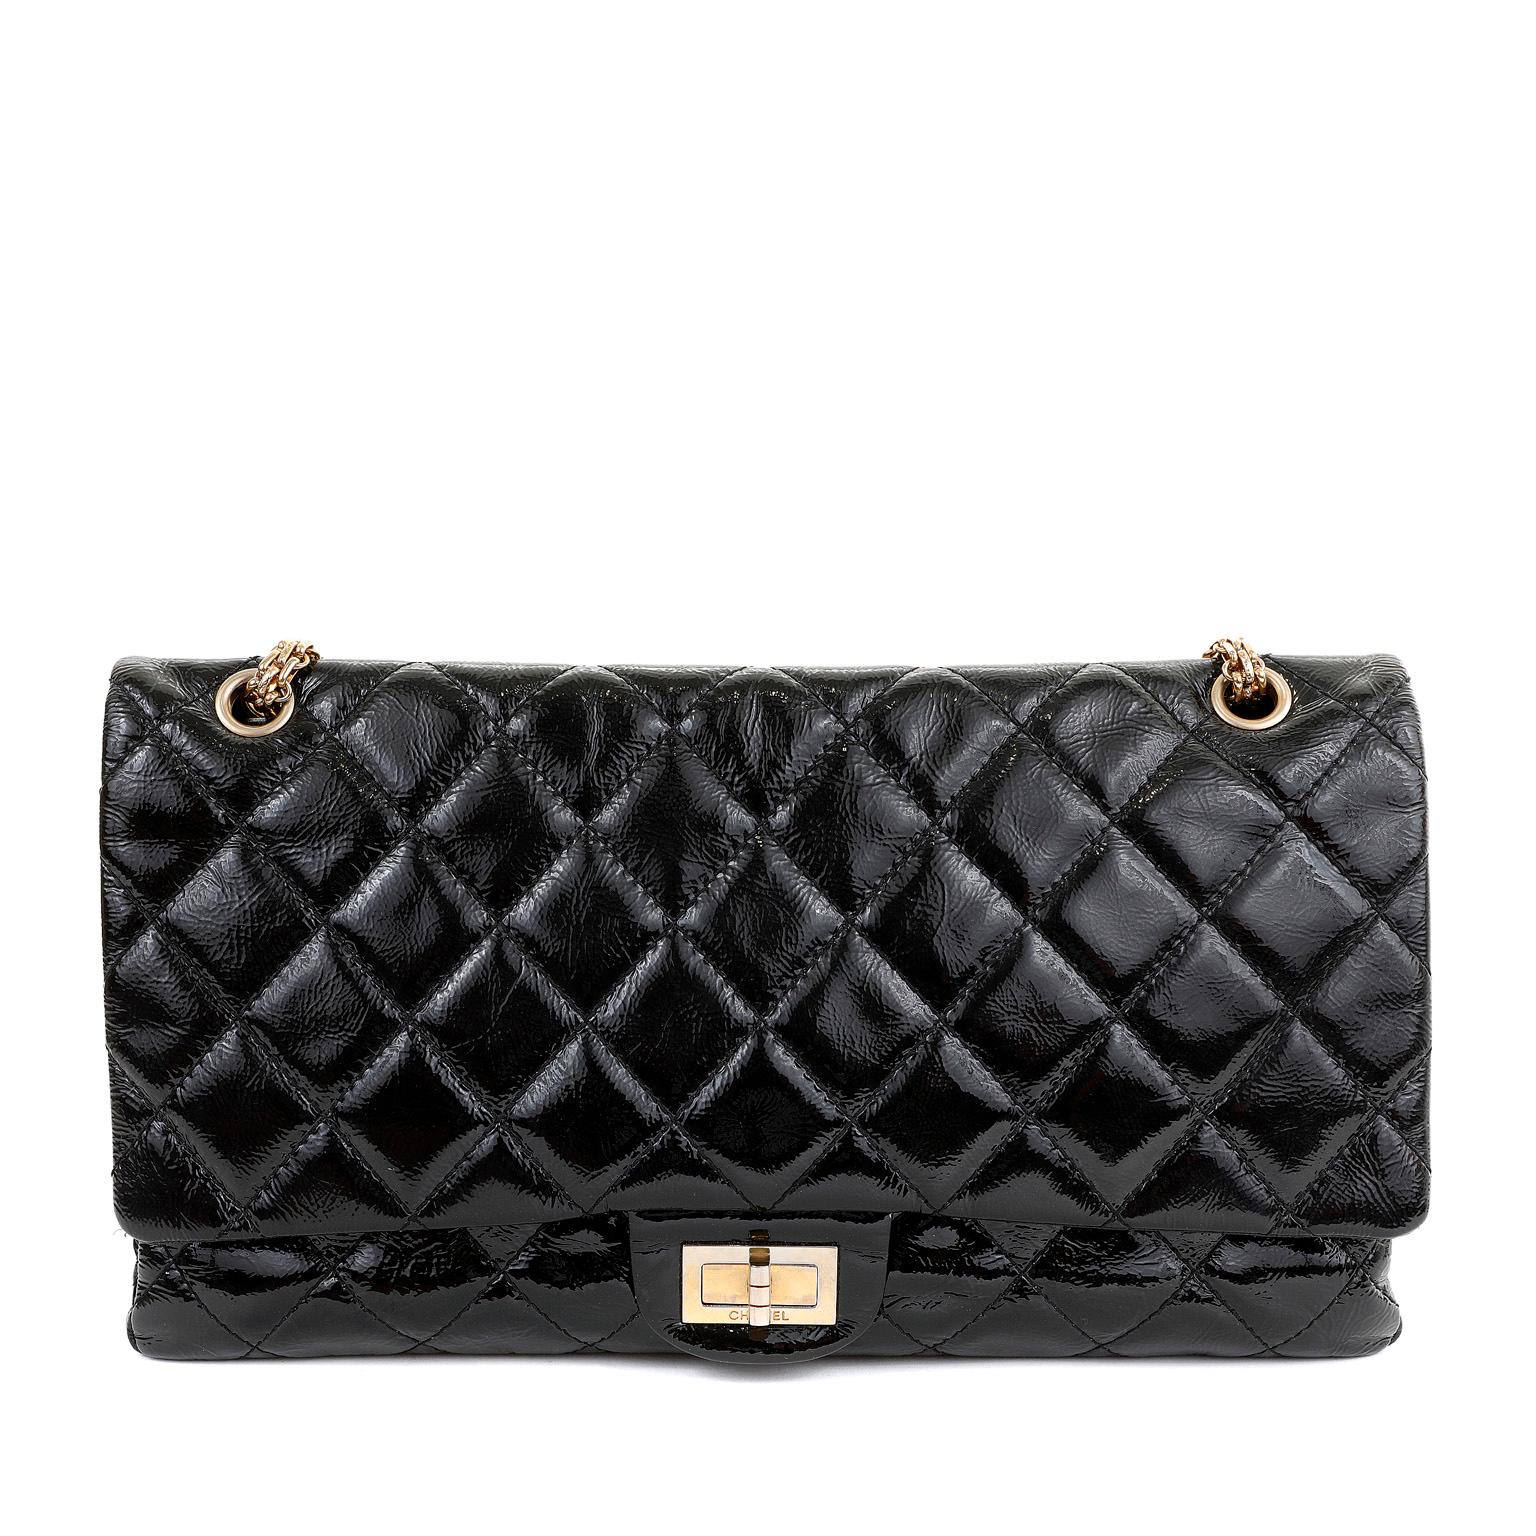 This authentic Chanel Black Patent Leather XL Reissue Flap Bag is in excellent vintage condition. Black weather friendly patent leather is quilted in signature Chanel diamond pattern.  Gold tone mademoiselle twist lock secures the exterior flap. 